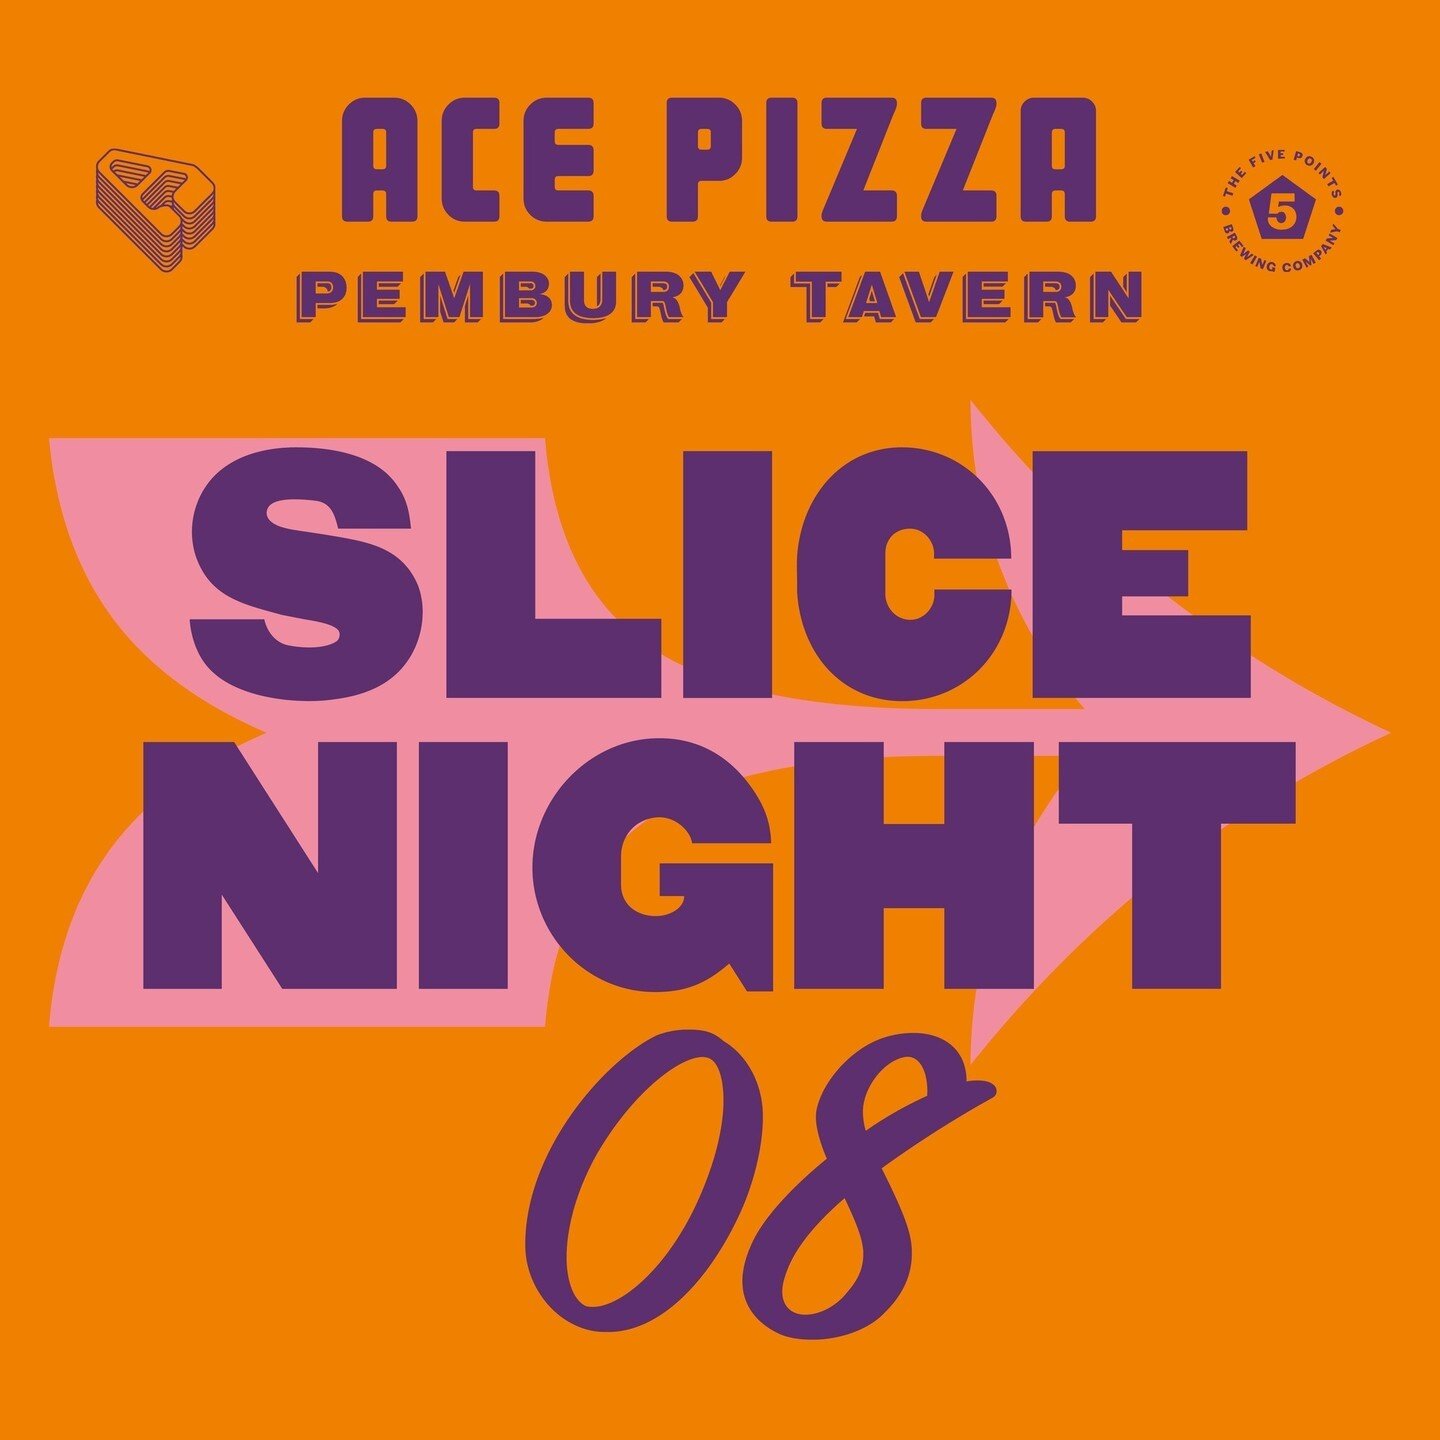 La Primavera! Spring is finally here! And so is our next monthly Slice Night at the @pemburytavern. Next Thursday the 28th March sees a very seasonal Spring themed Slice Night at the pub. We're also very excited to have a very special beer pairing fo